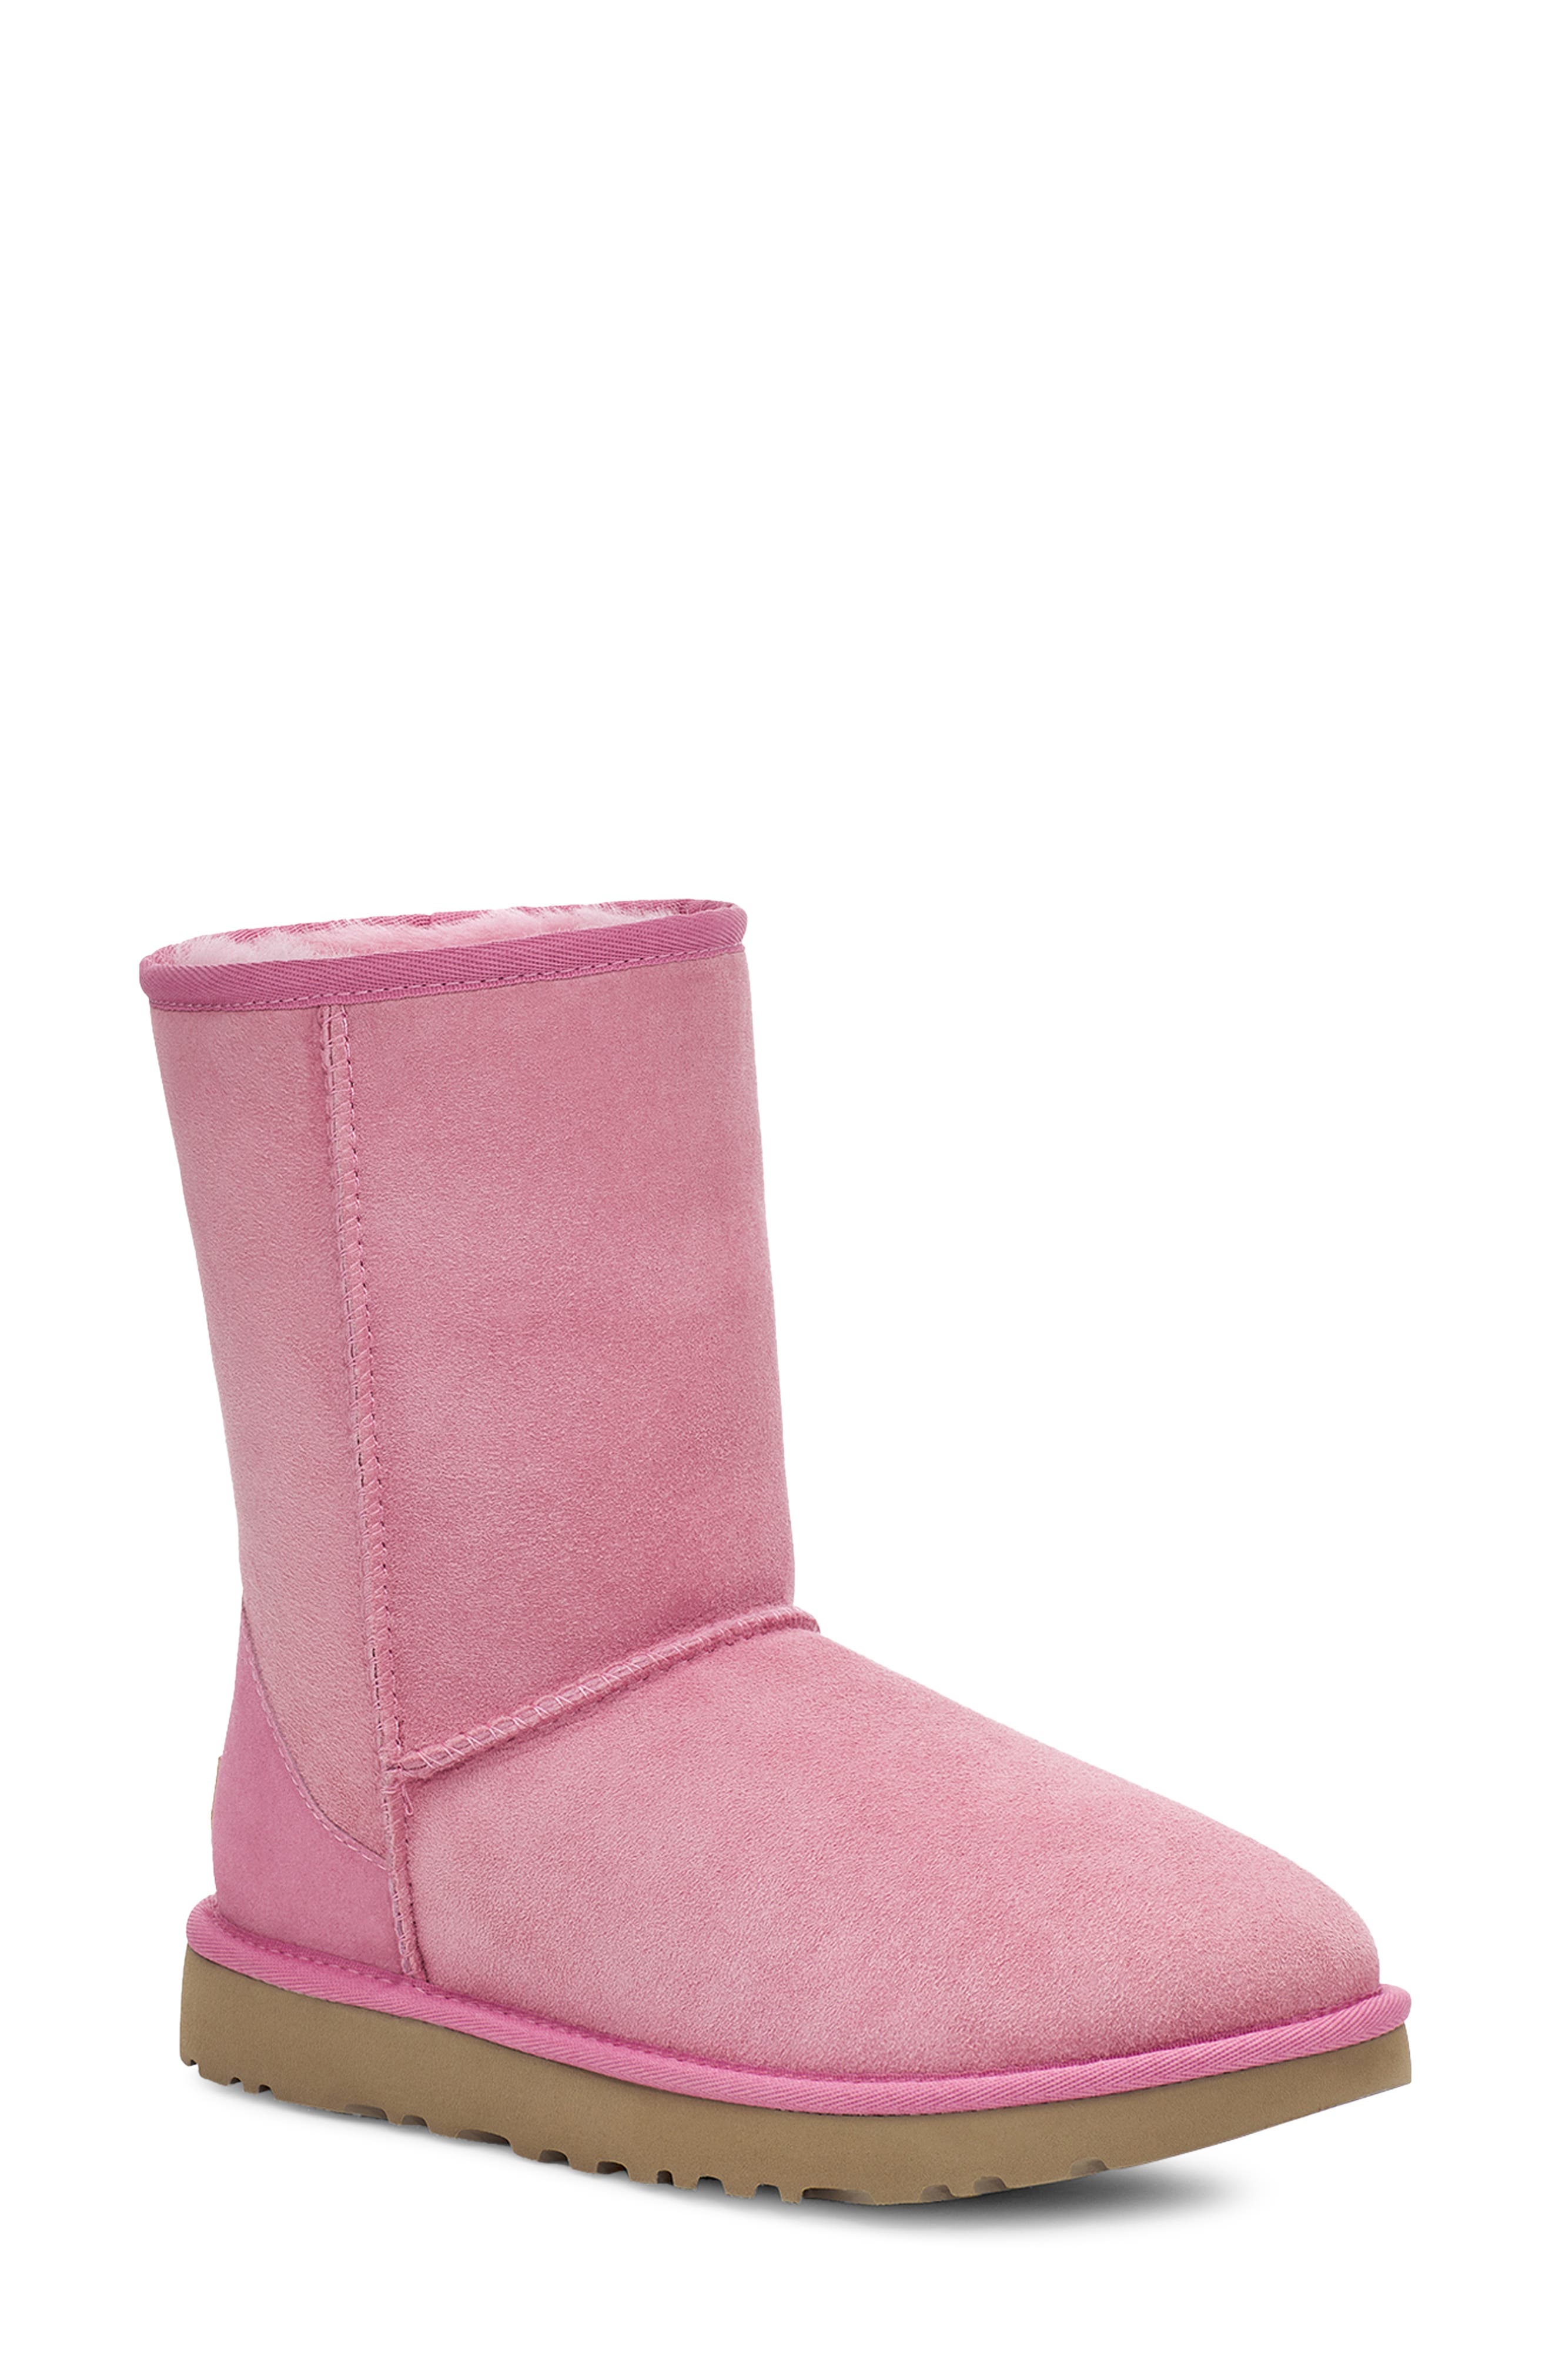 pink new uggs